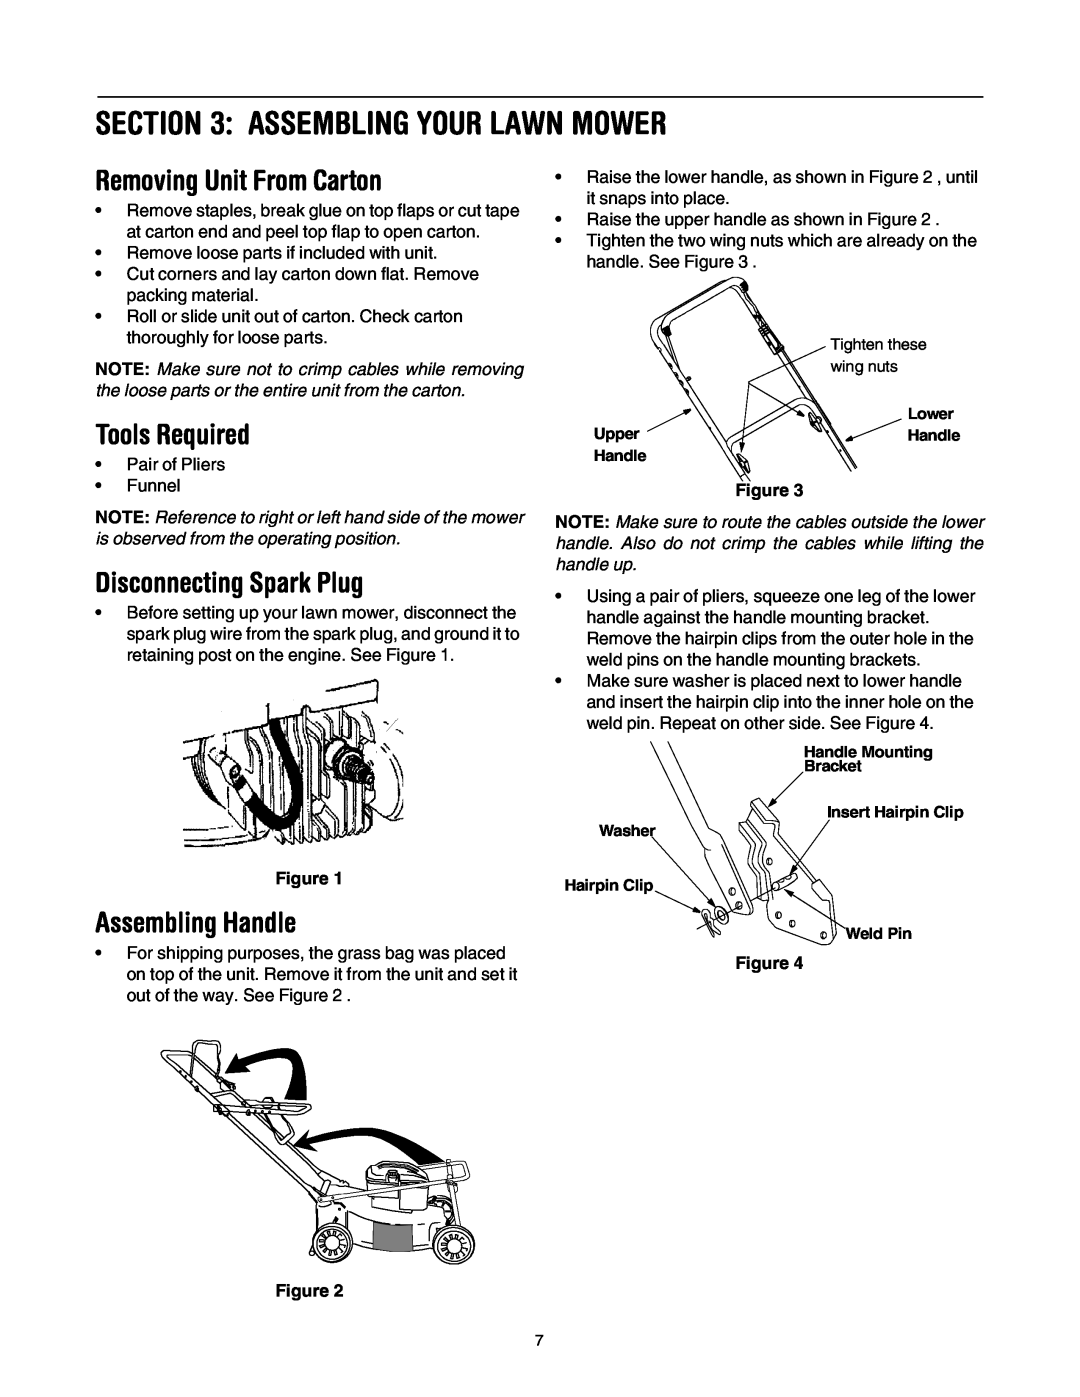 MTD 435 Assembling Your Lawn Mower, Removing Unit From Carton, Tools Required, Disconnecting Spark Plug, Assembling Handle 